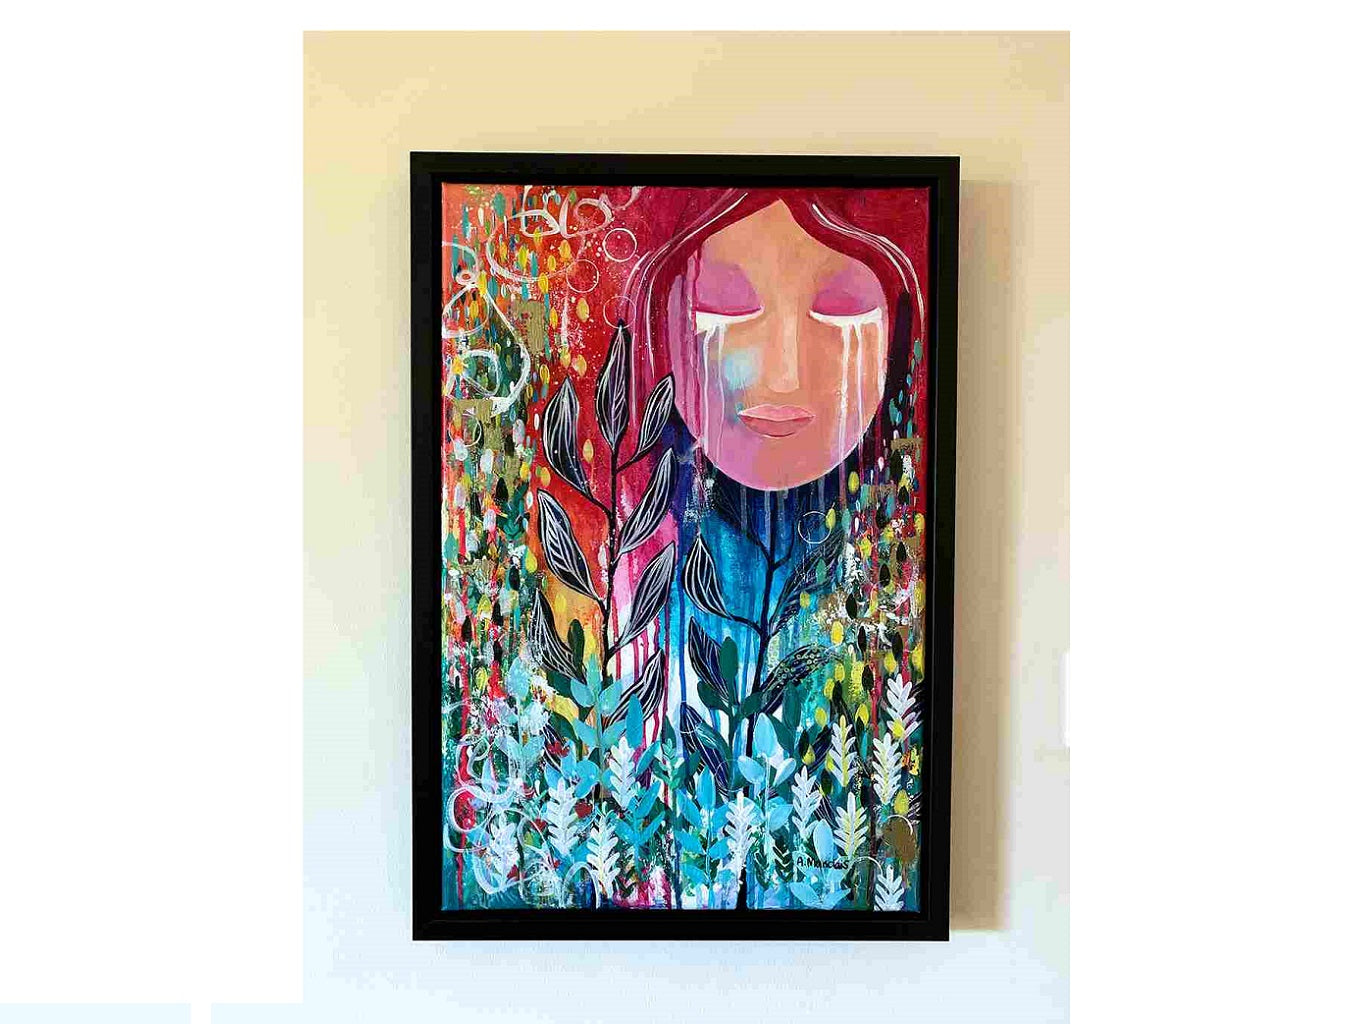 AM 110 The Warden black - floater - frame - Audree Marsoloais - acrylic - painting - canvas - face - nature - colorful - art - decor (3)